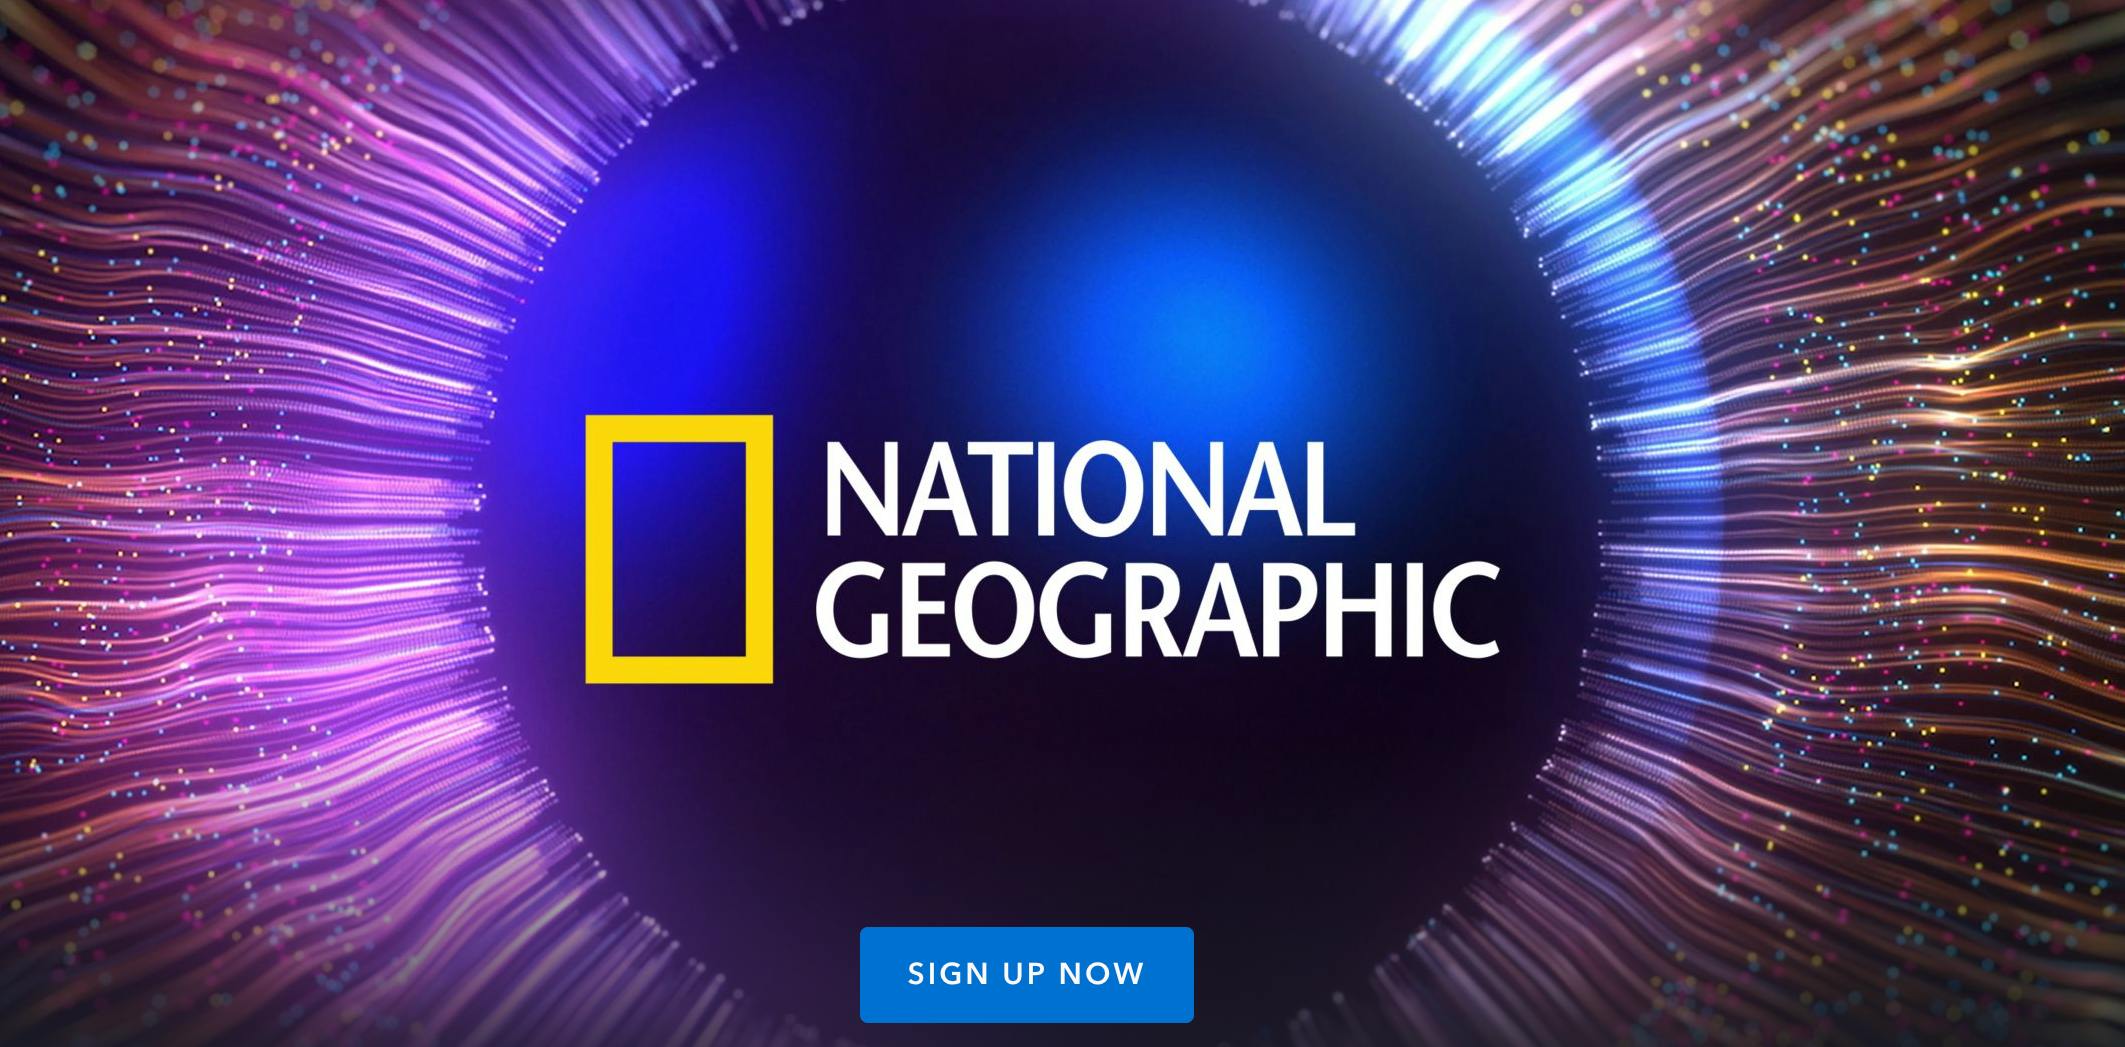 Disney Plus National Geographic sign-up page